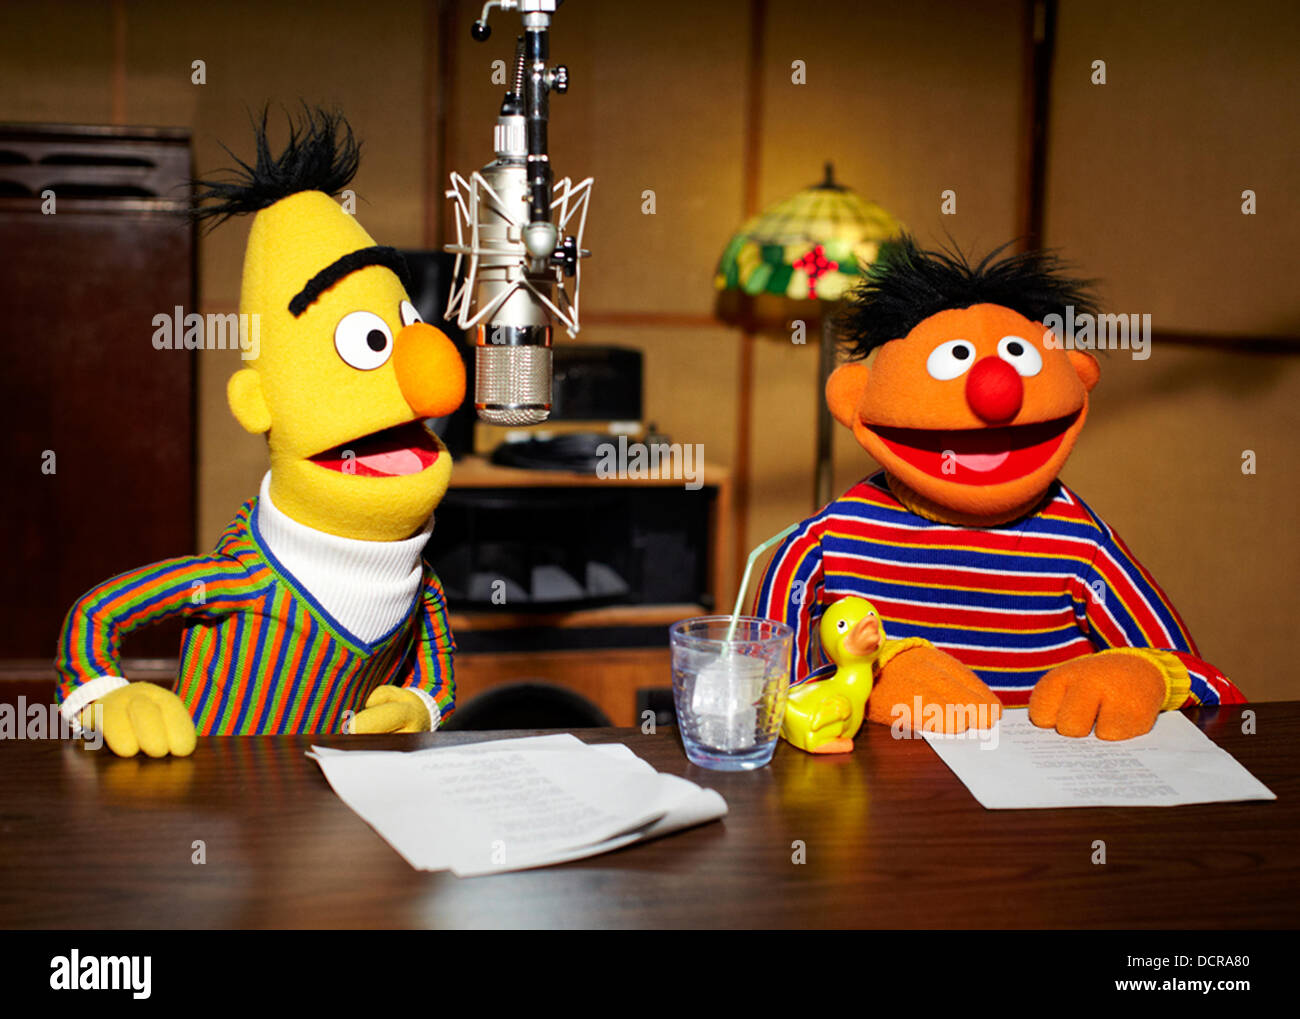 Driving fun banter with Bert and Ernie  'Sesame Street' muppets Bert and Ernie are now available for TomTom devices. Developed in association with Sesame Workshop and Locutio Voice Technologies, drivers can get travel tips from flat-sharing pals. The two Stock Photo